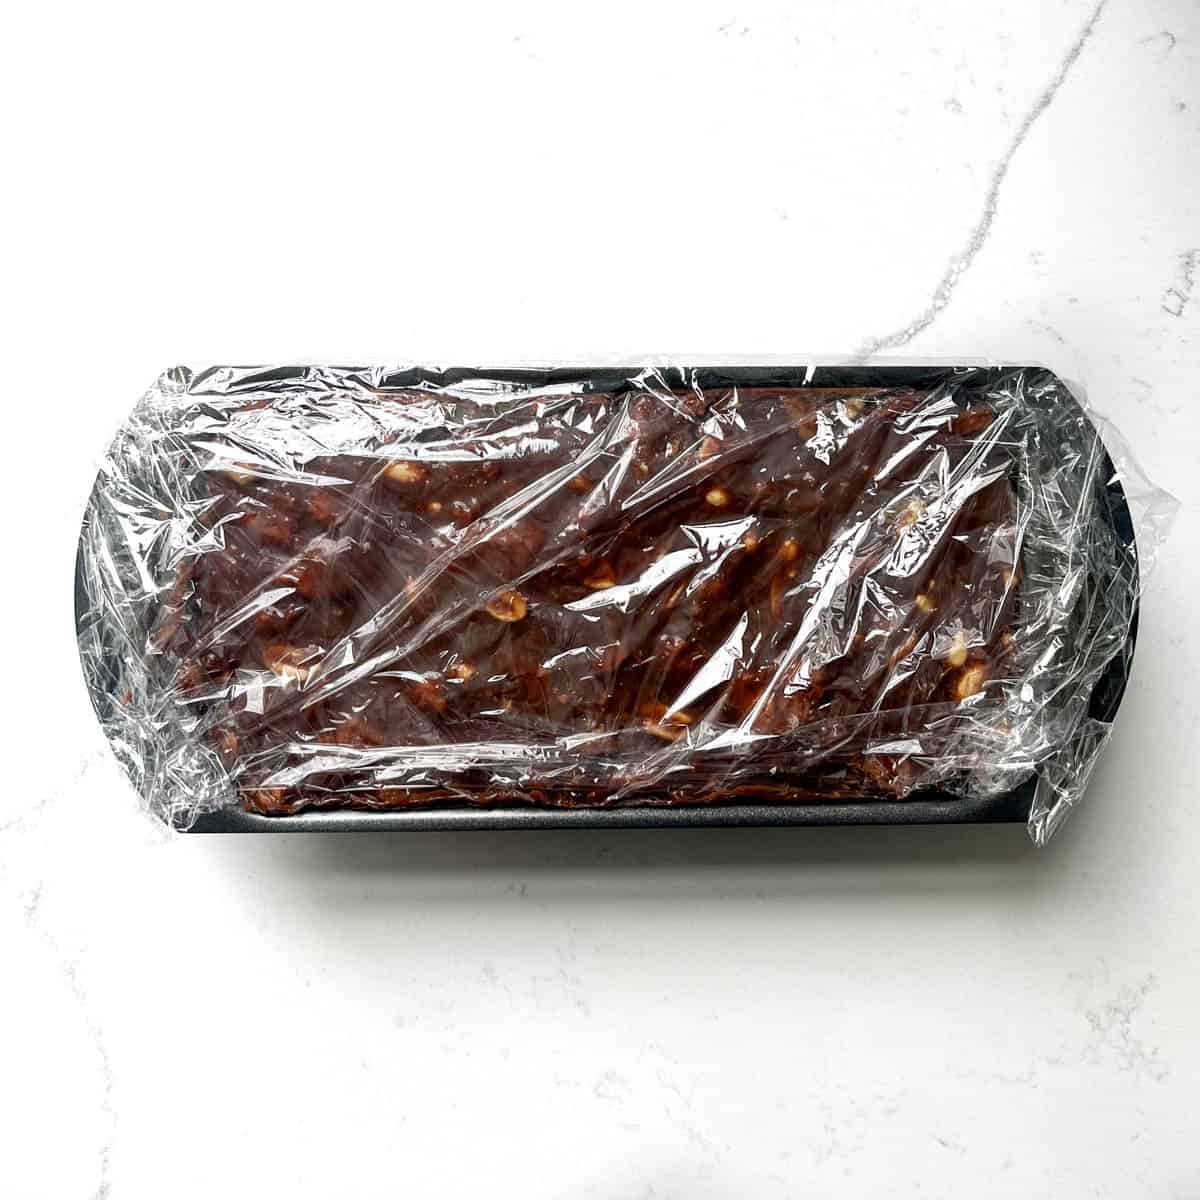 Tinginys mixture in a loaf pan covered with plastic wrap.